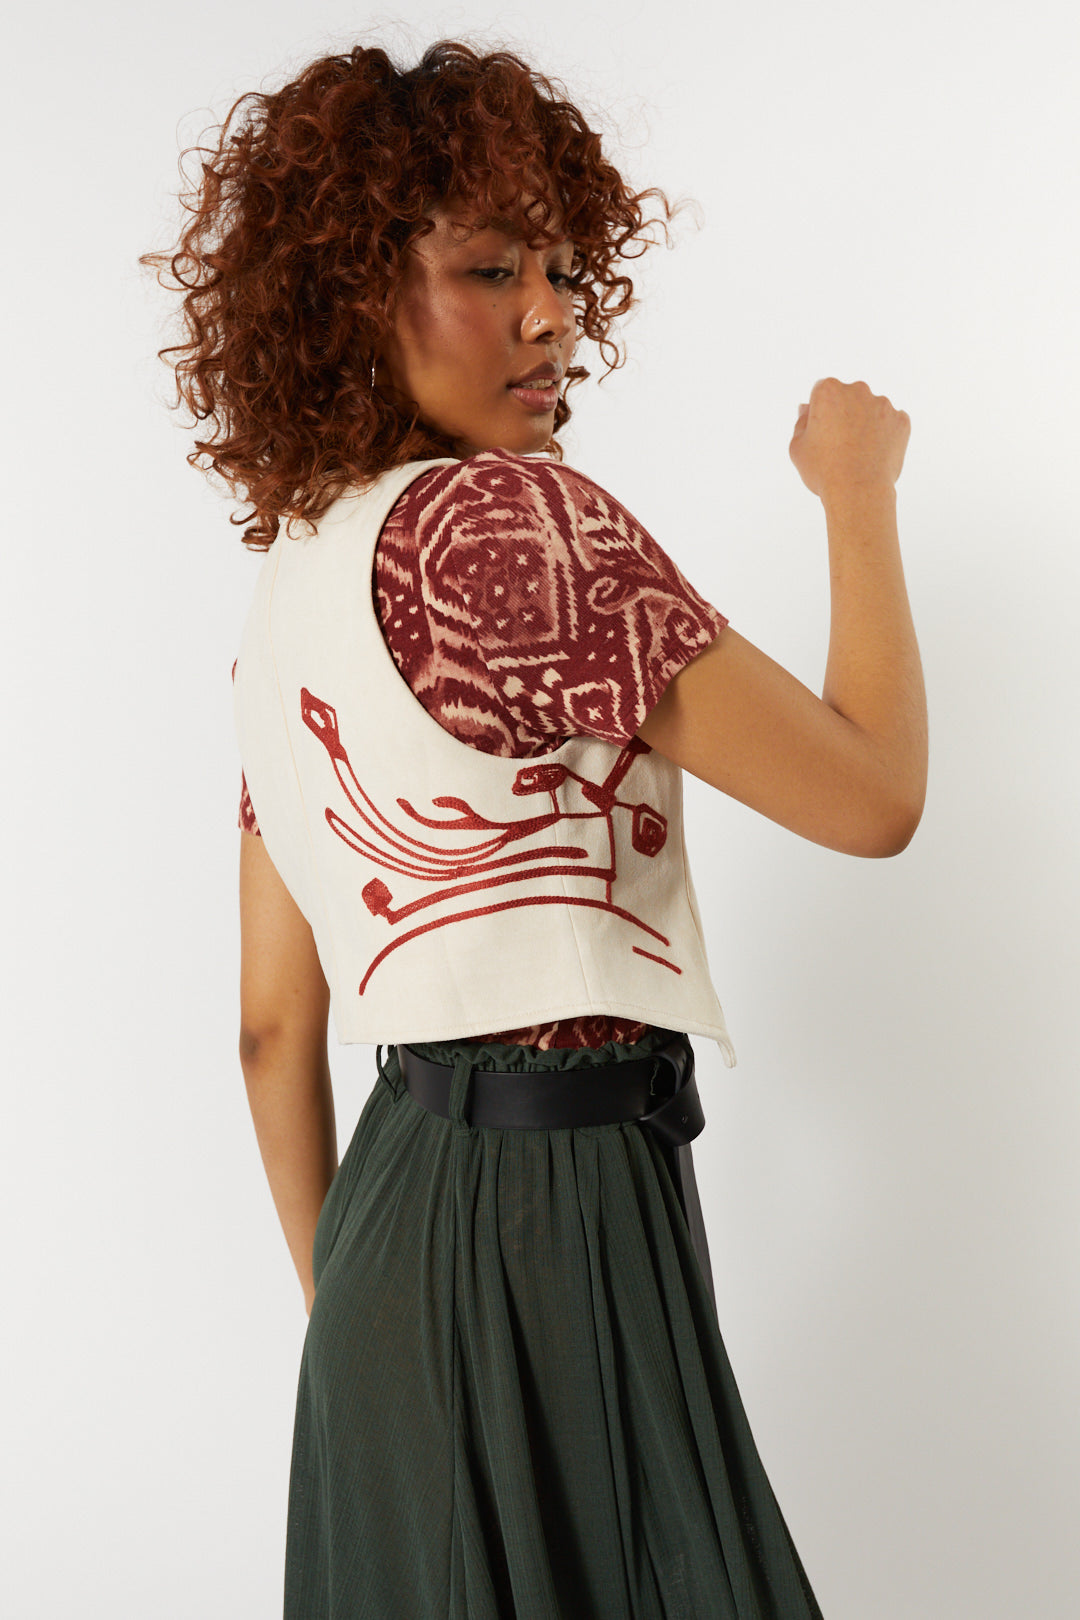 Ivory faux suede vest with embroidery | Vest